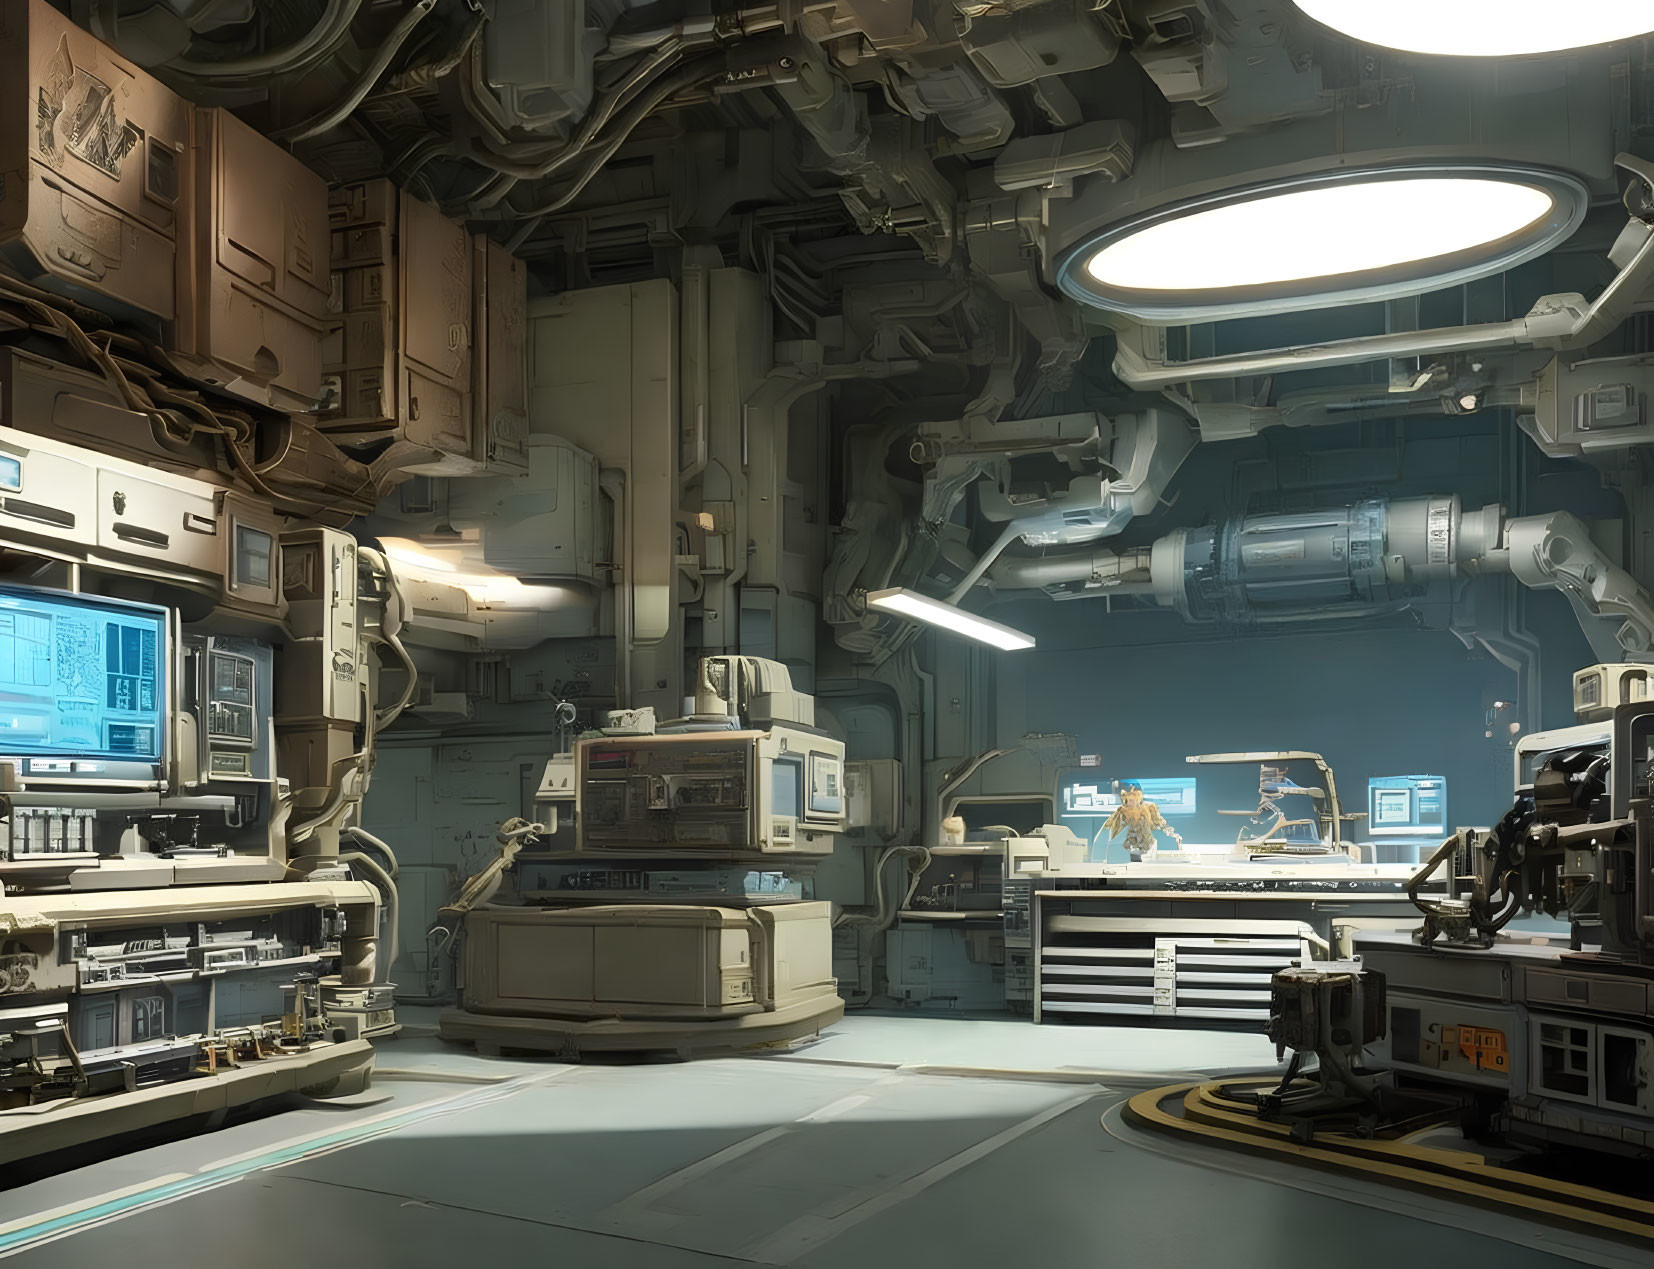 Detailed Futuristic Control Room with Monitors and Machinery